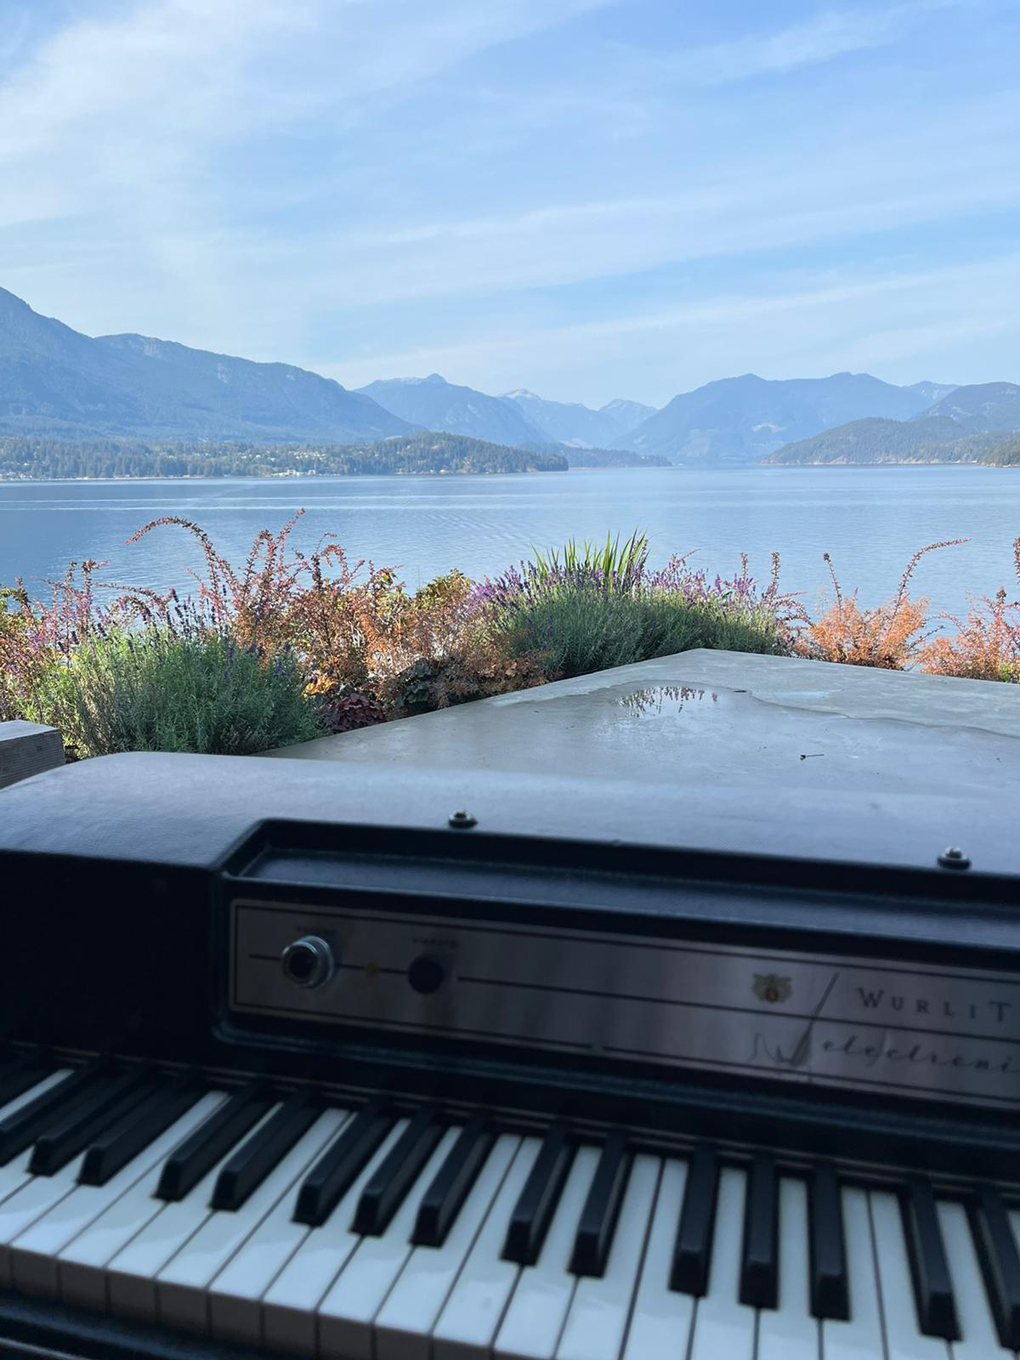 A Wurlitzer keyboard in front of the sea and mountains and purple flowers